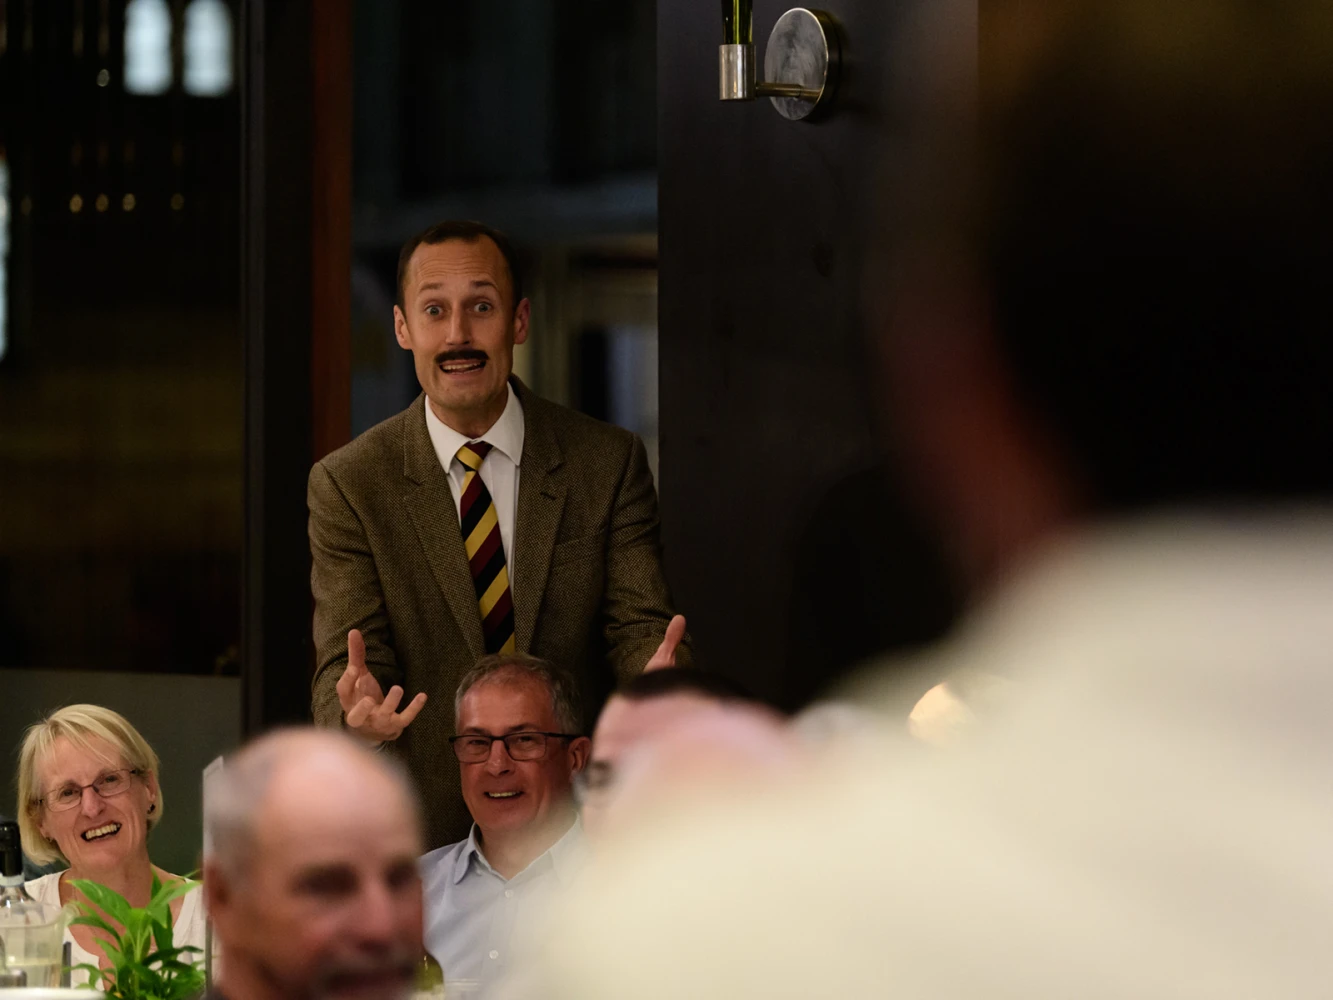 Faulty Towers The Dining Experience: What to expect - 1